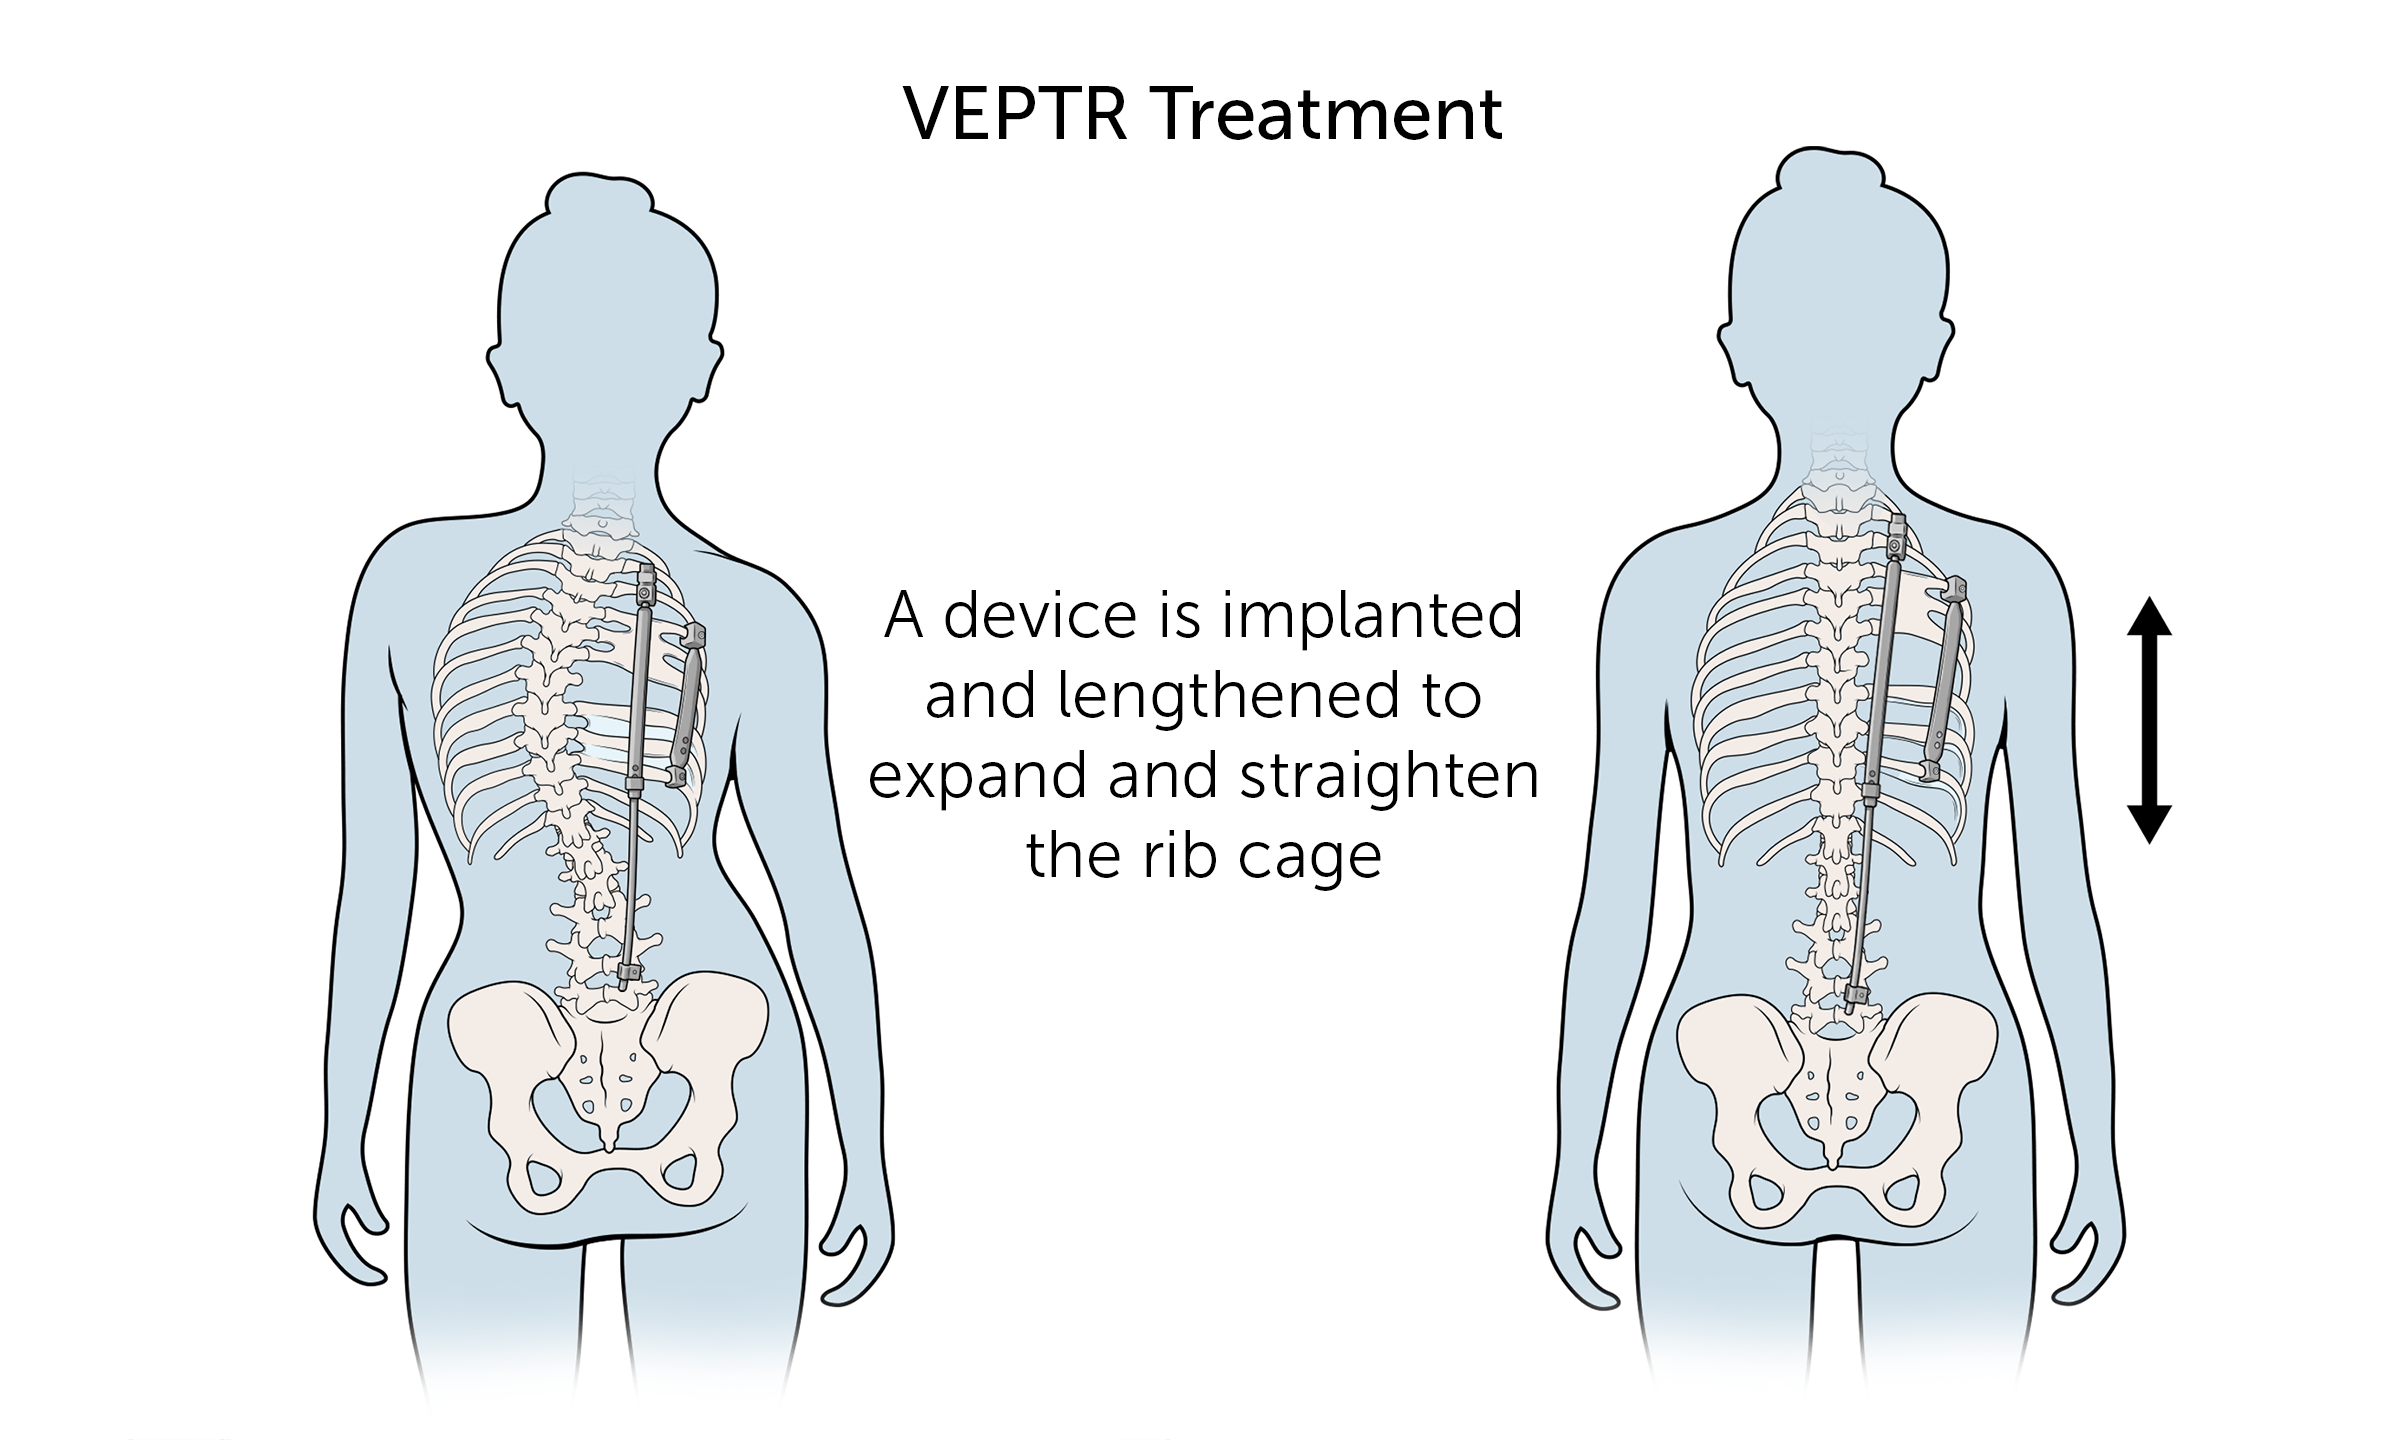 In VEPTR treatment, a device is implanted and lengthened to expand and straighten the rib cage.